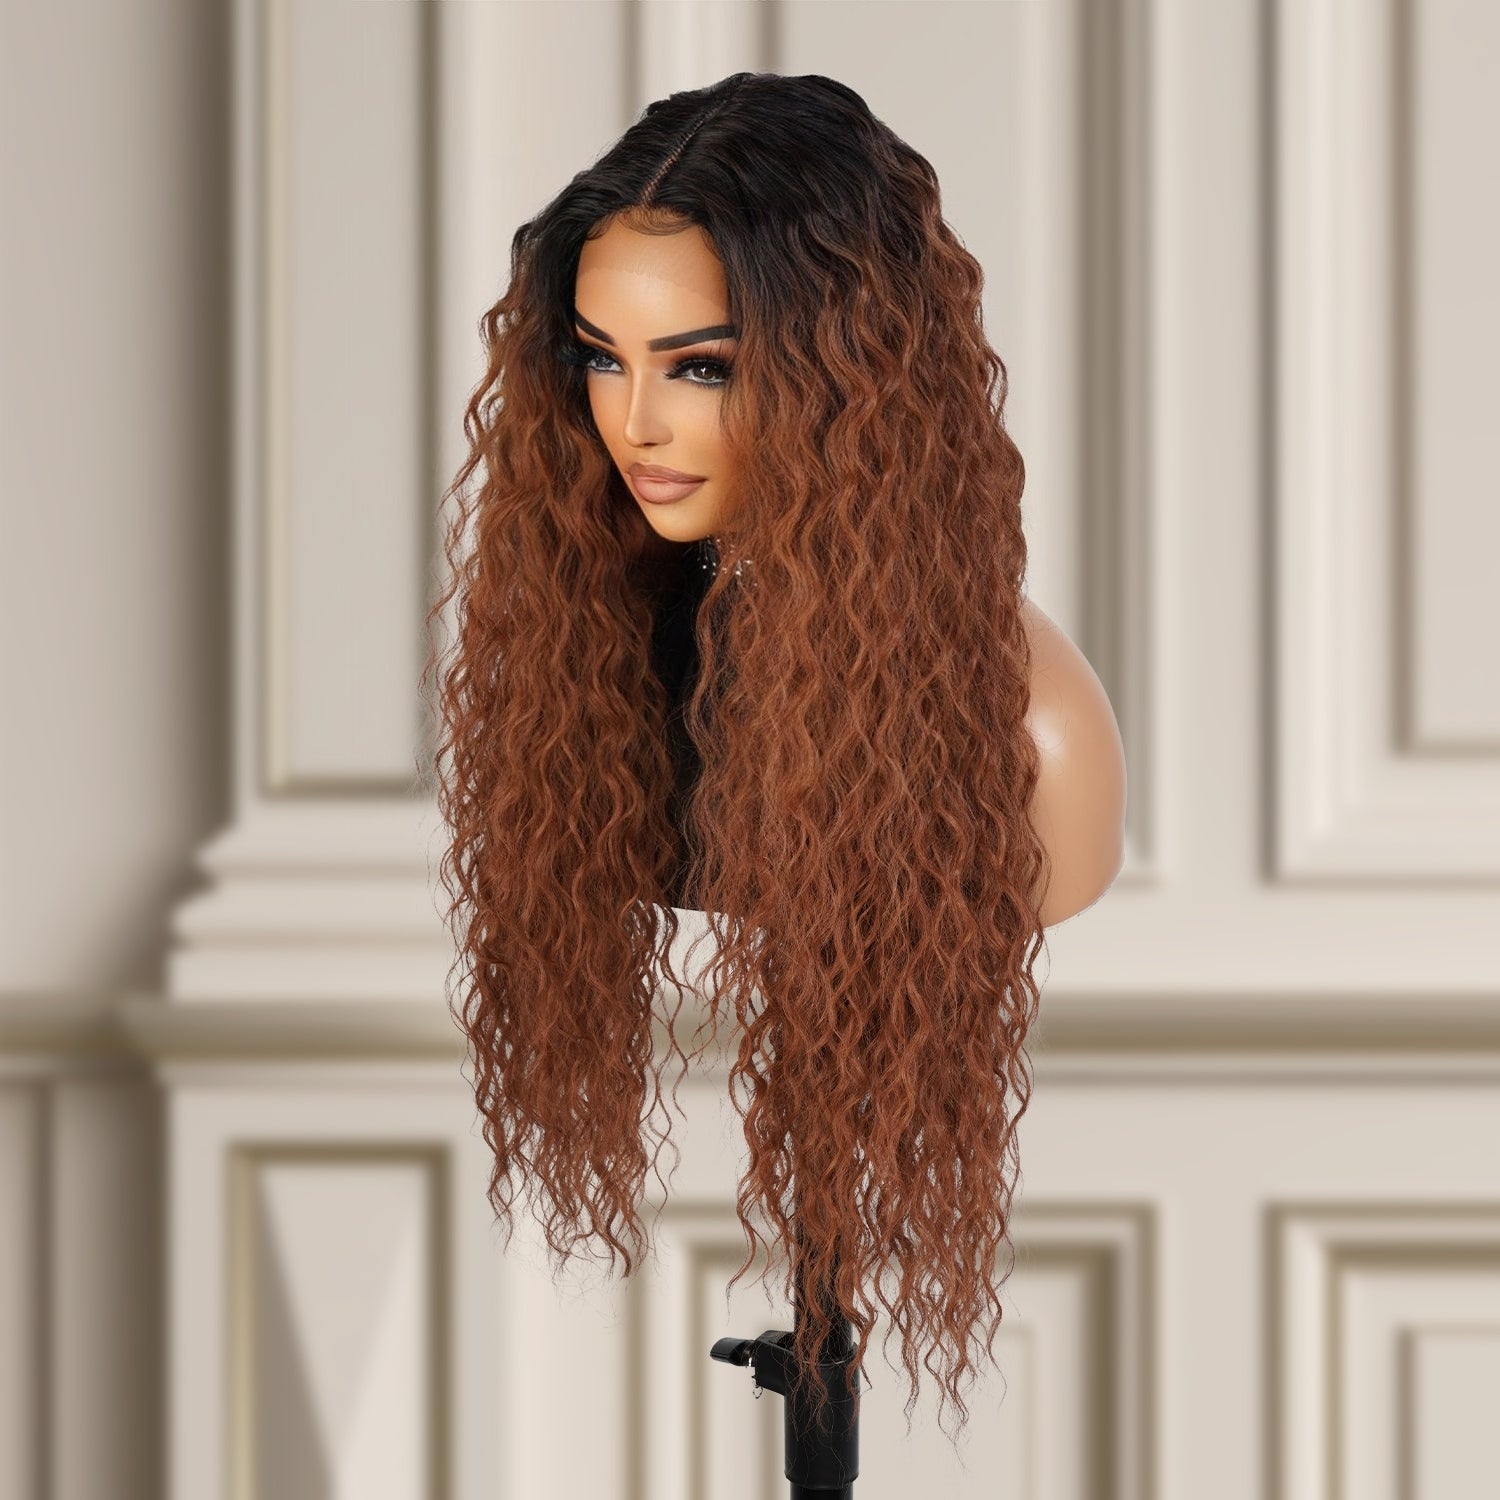  Introducing our gorgeous 30-inch long Bohemian curl Swiss lace front wig! Made with high-quality heat-resistant synthetic fibers, this wig features a middle center part for a natural-looking hairline. Designed for black fashion women, the curly wavy style adds volume and dimension to your hair. With adjustable straps for a secure fit, this versatile wig is a must-have for style enthusiasts. Shop now for ultimate style and versatility!